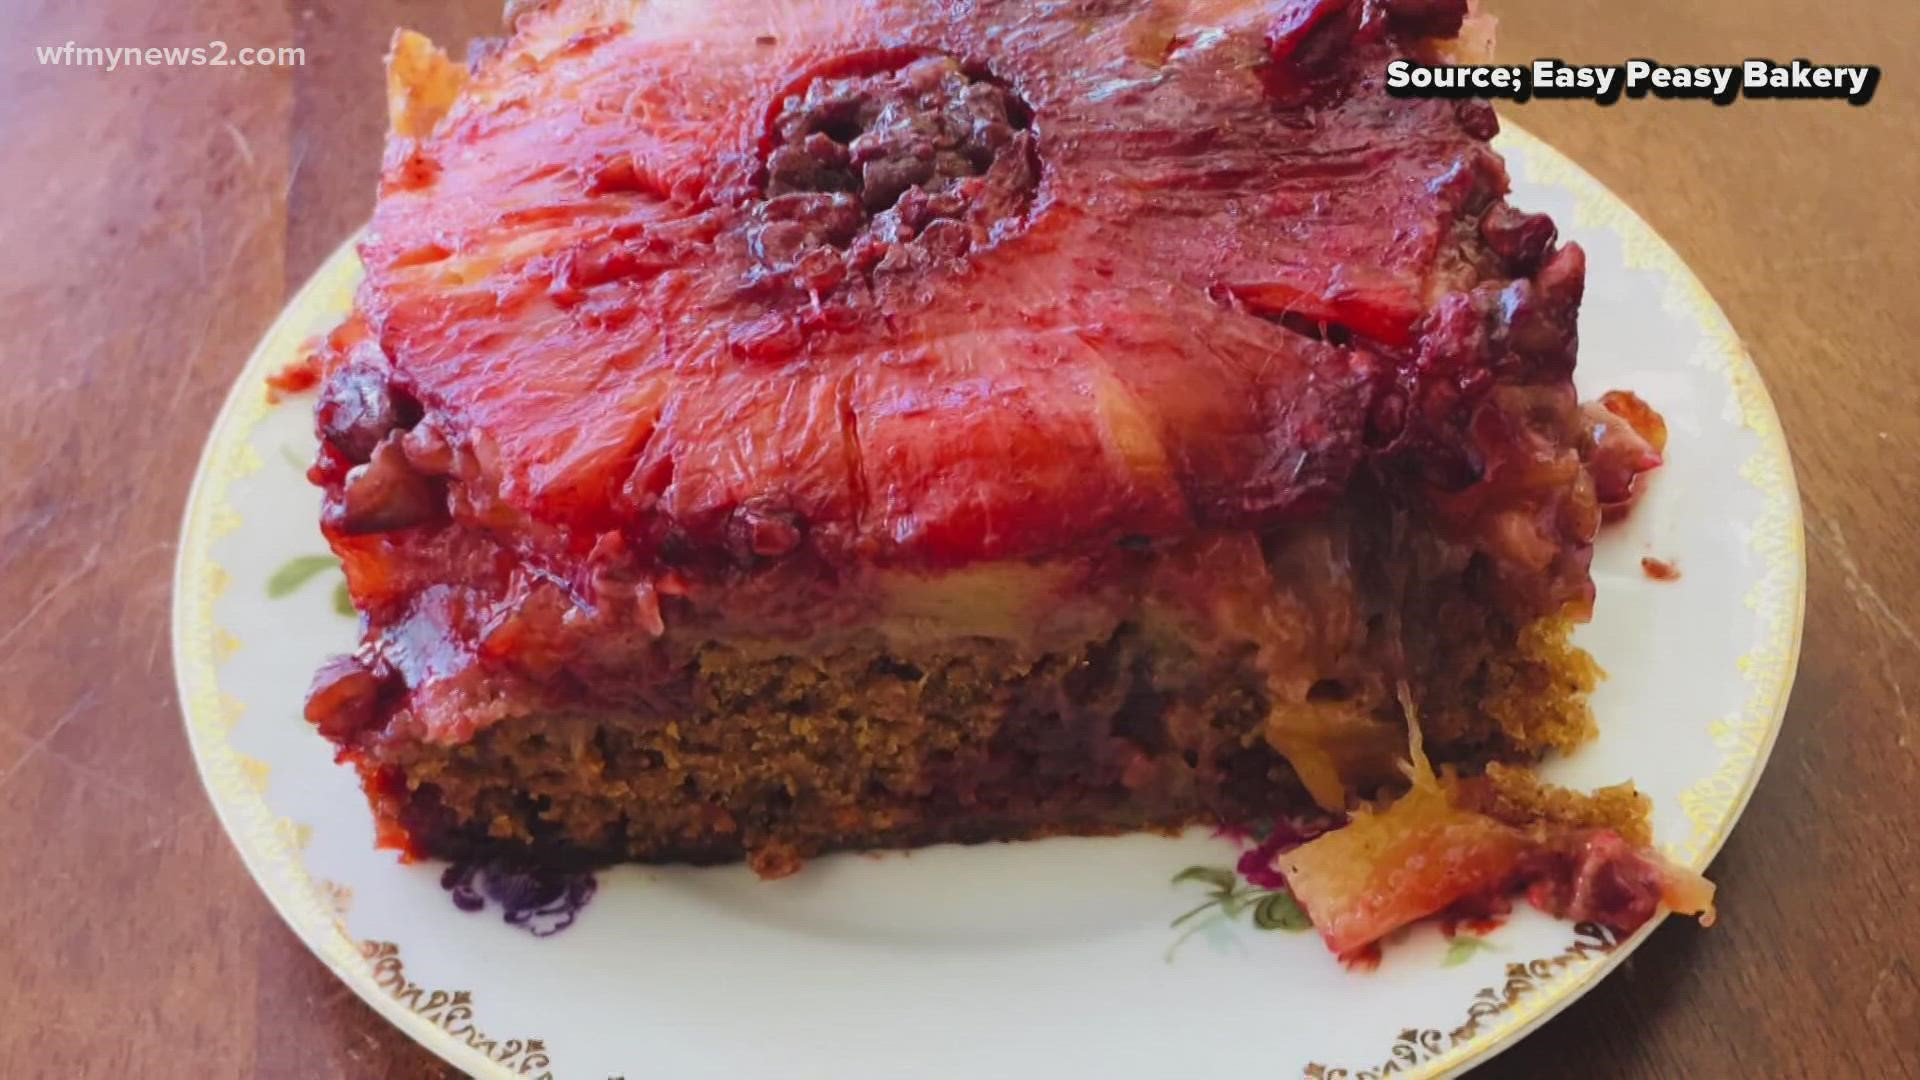 Easy Peasy Bakery in Greensboro concocted the Upside Down Cheerwine cake.